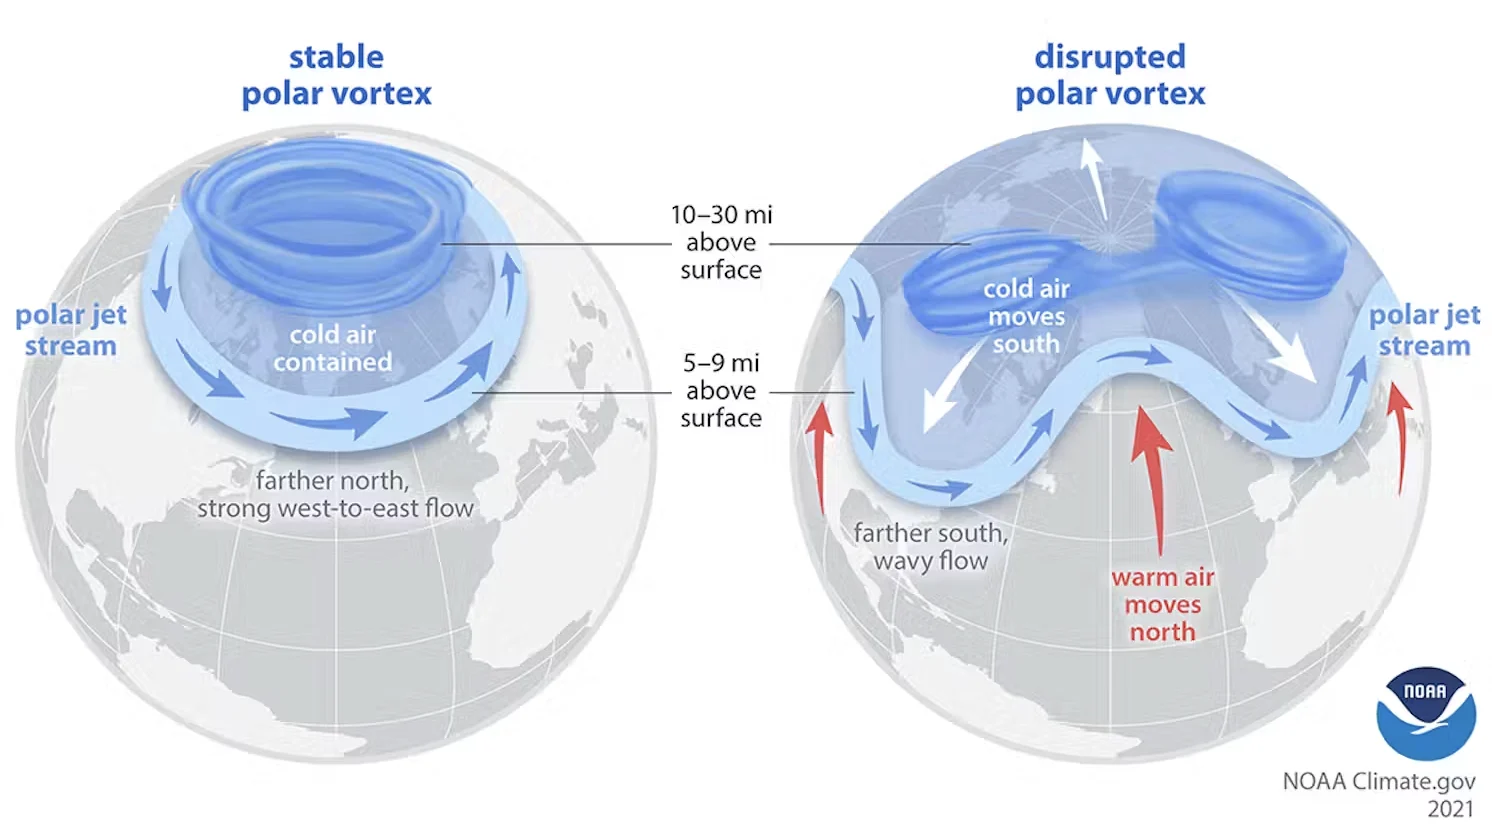 The Arctic polar vortex is a strong band of winds in the stratosphere, 10-30 miles above the surface. When this band of winds, normally ringing the North Pole, weakens, it can split. The polar jet stream can mirror this upheaval, becoming weaker or wavy. At the surface, cold air is pushed southward in some locations. NOAA: https://www.climate.gov/news-features/understanding-climate/understanding-arctic-polar-vortex